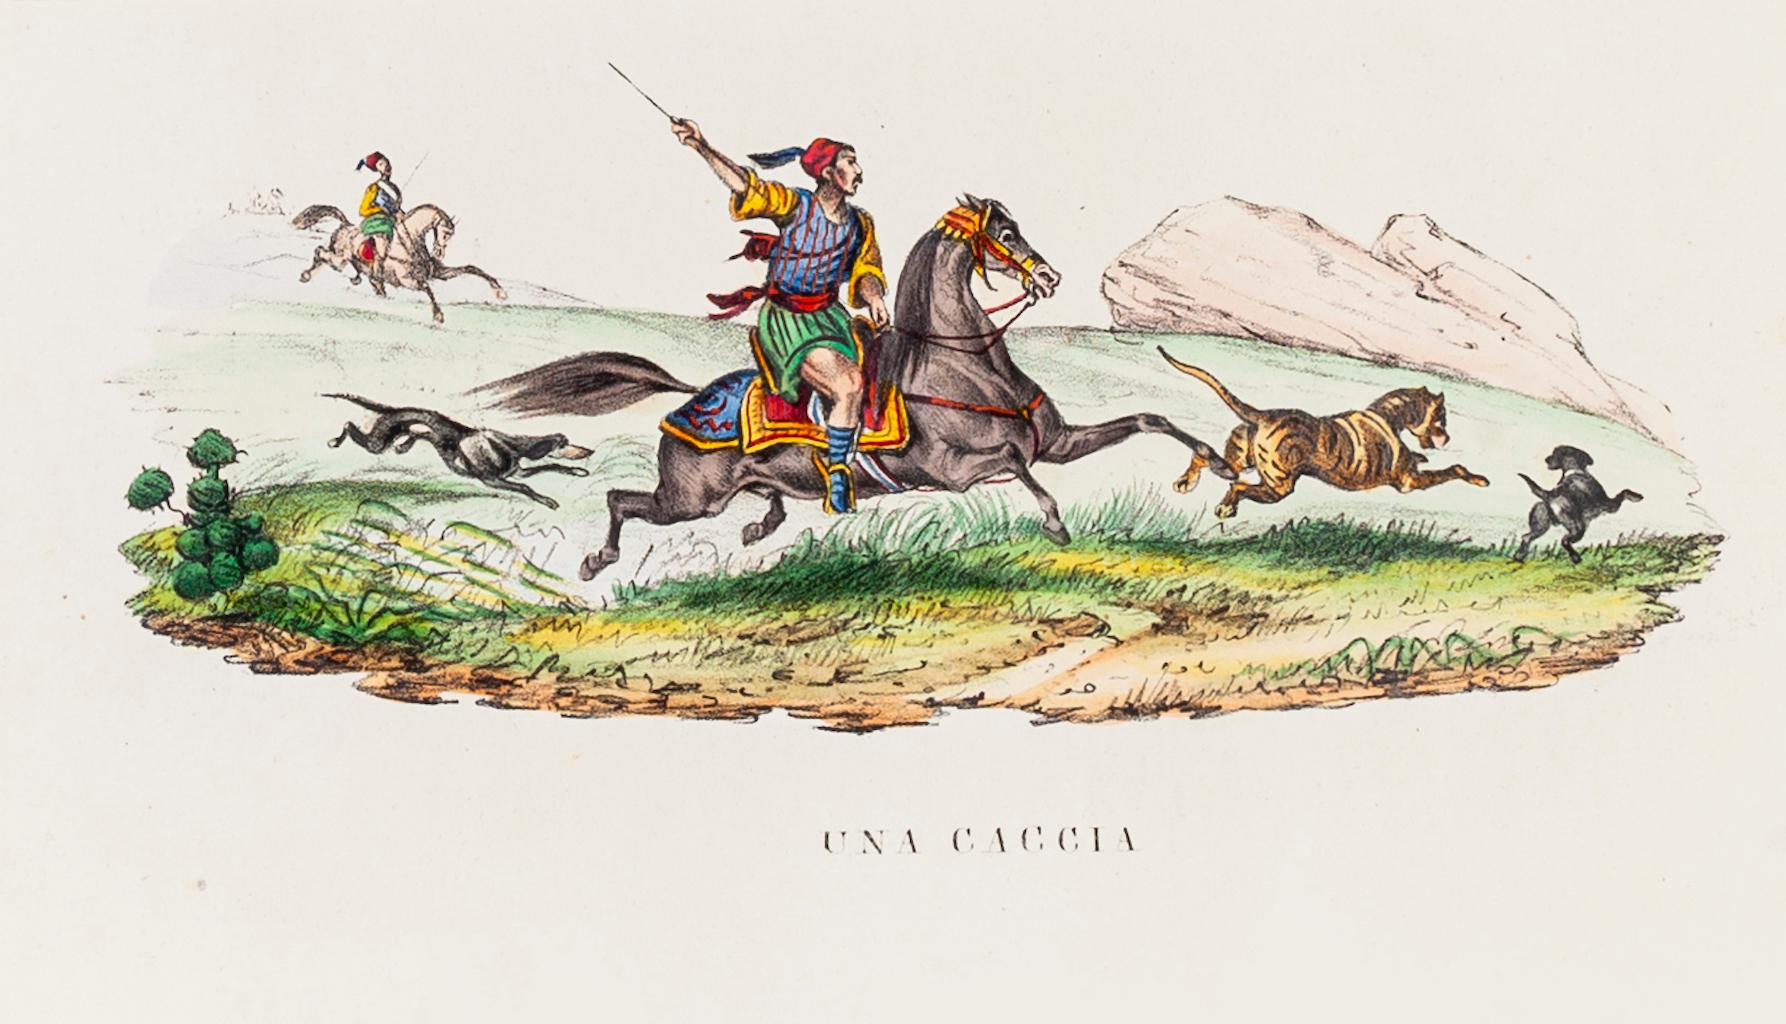 Unknown Figurative Print - Hunting in North Africa - Lithograph - 1848 ca.